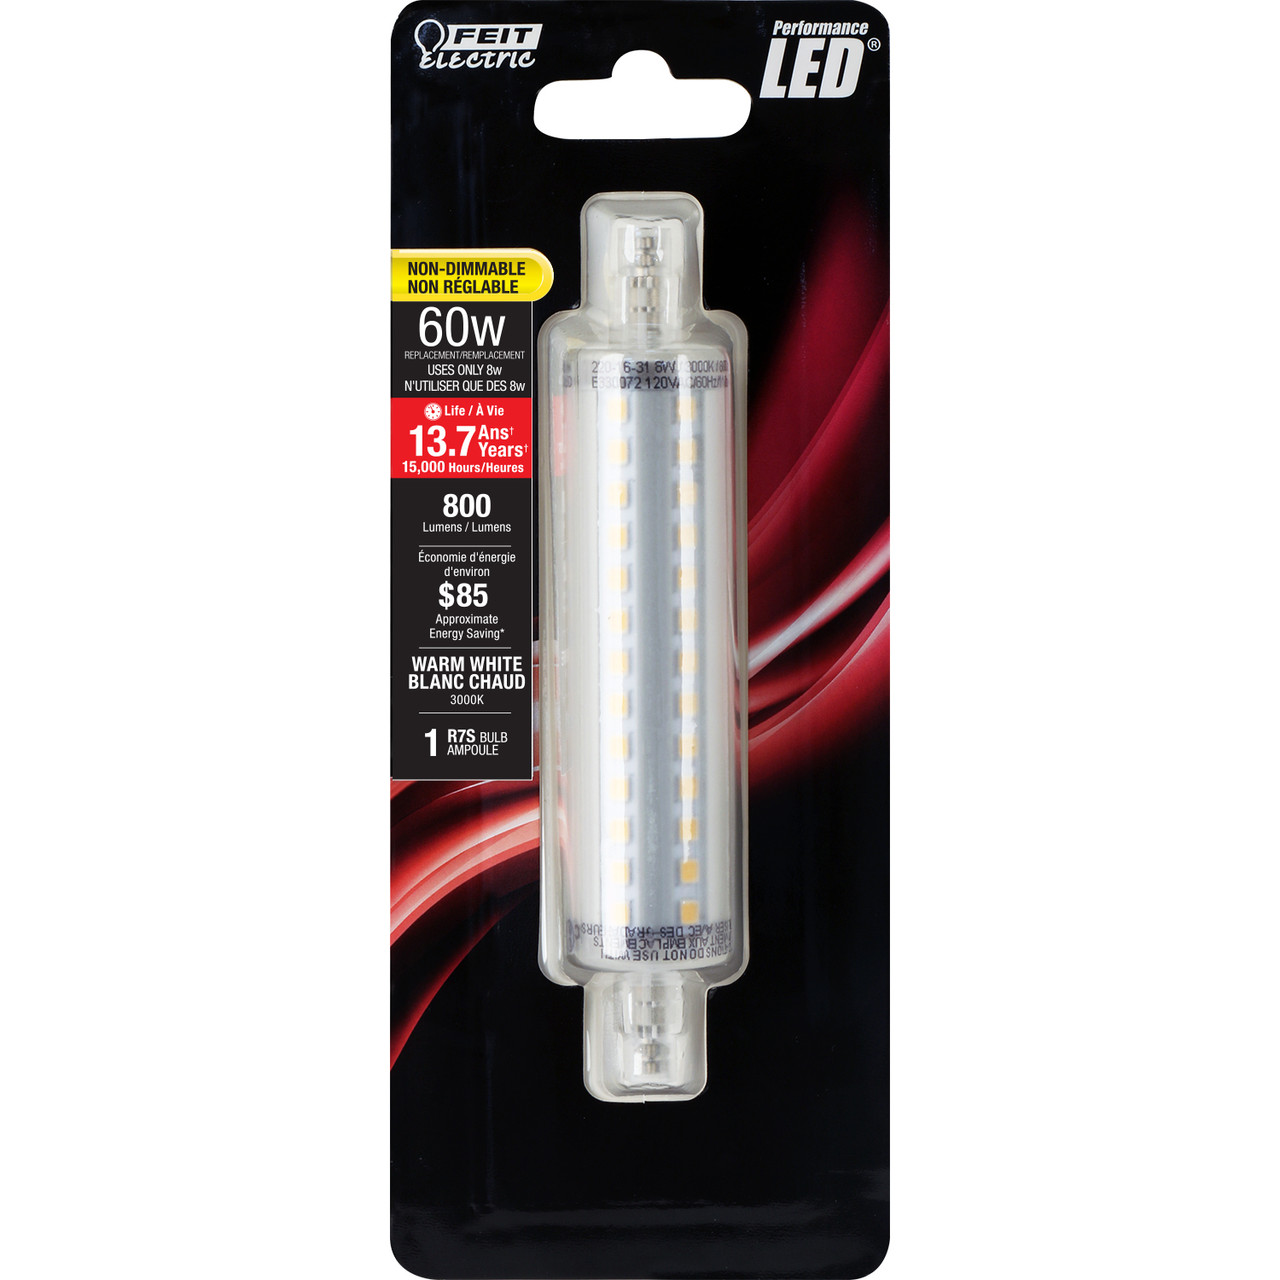 Feit Electric BPJ118/LED LED R7S, 60W Equiv., 800 Lumen, 118mm,  Double-Ended T3, Halogen Replacement